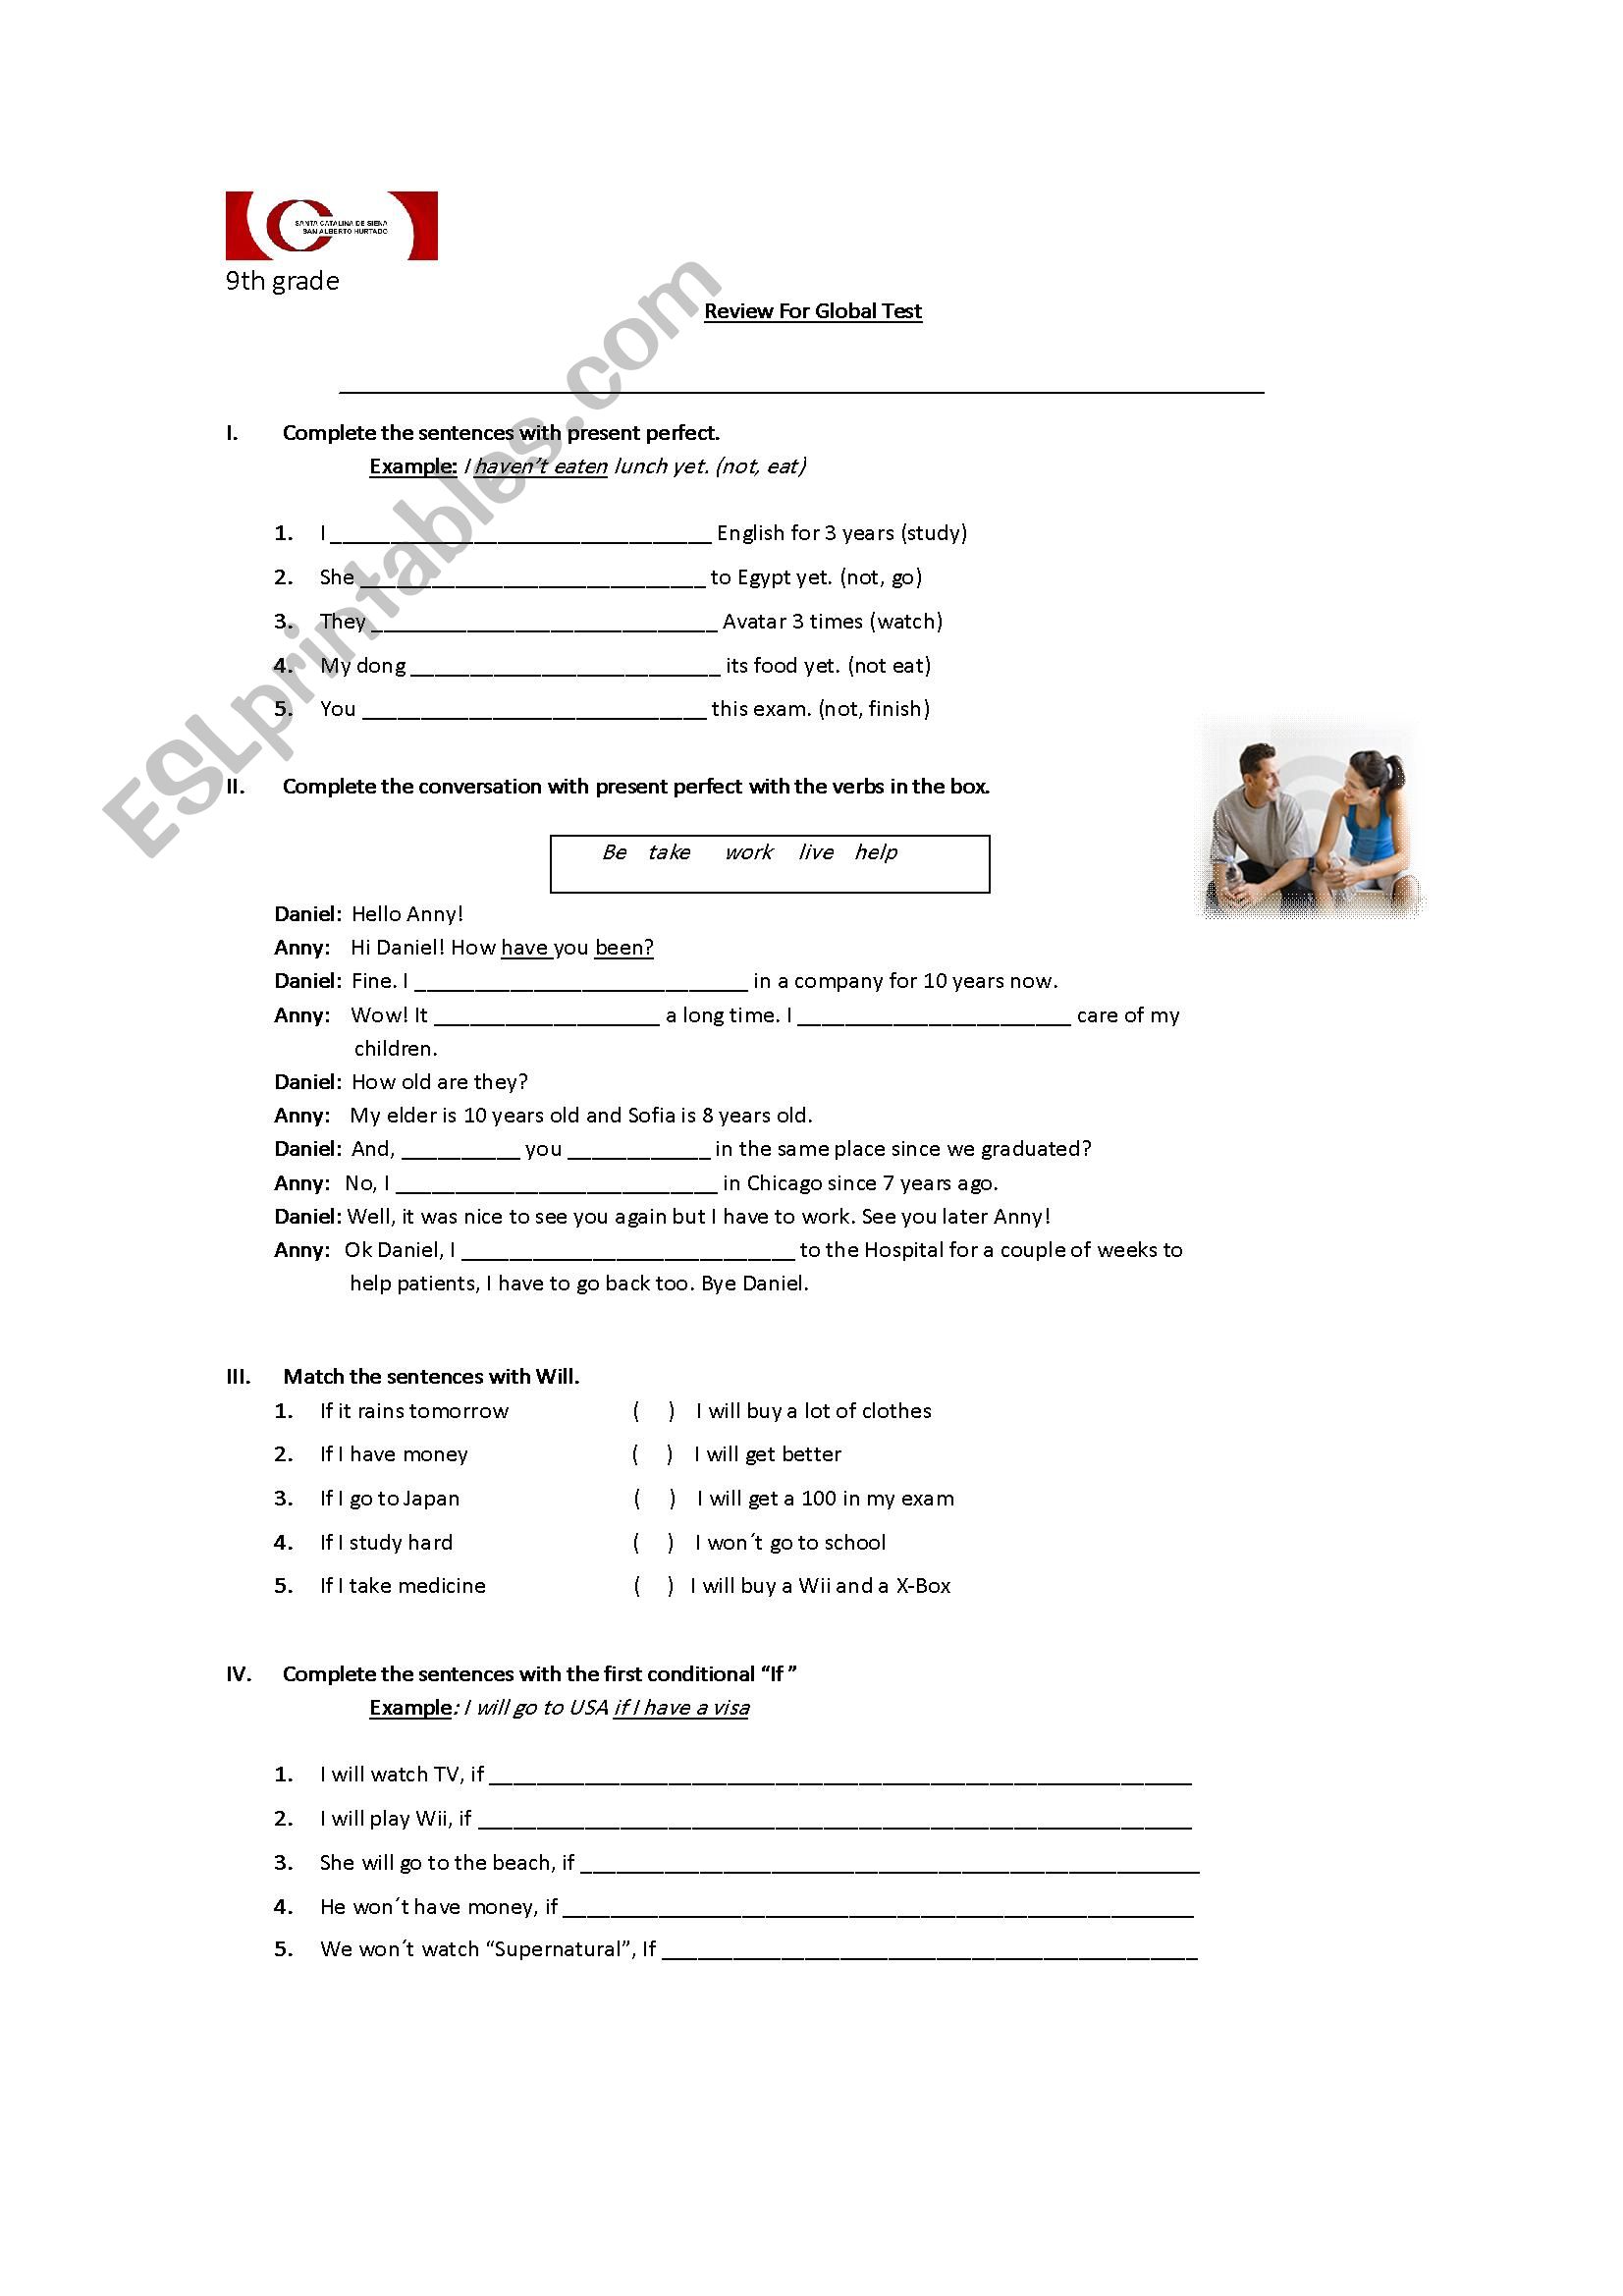 Review Present perfect worksheet